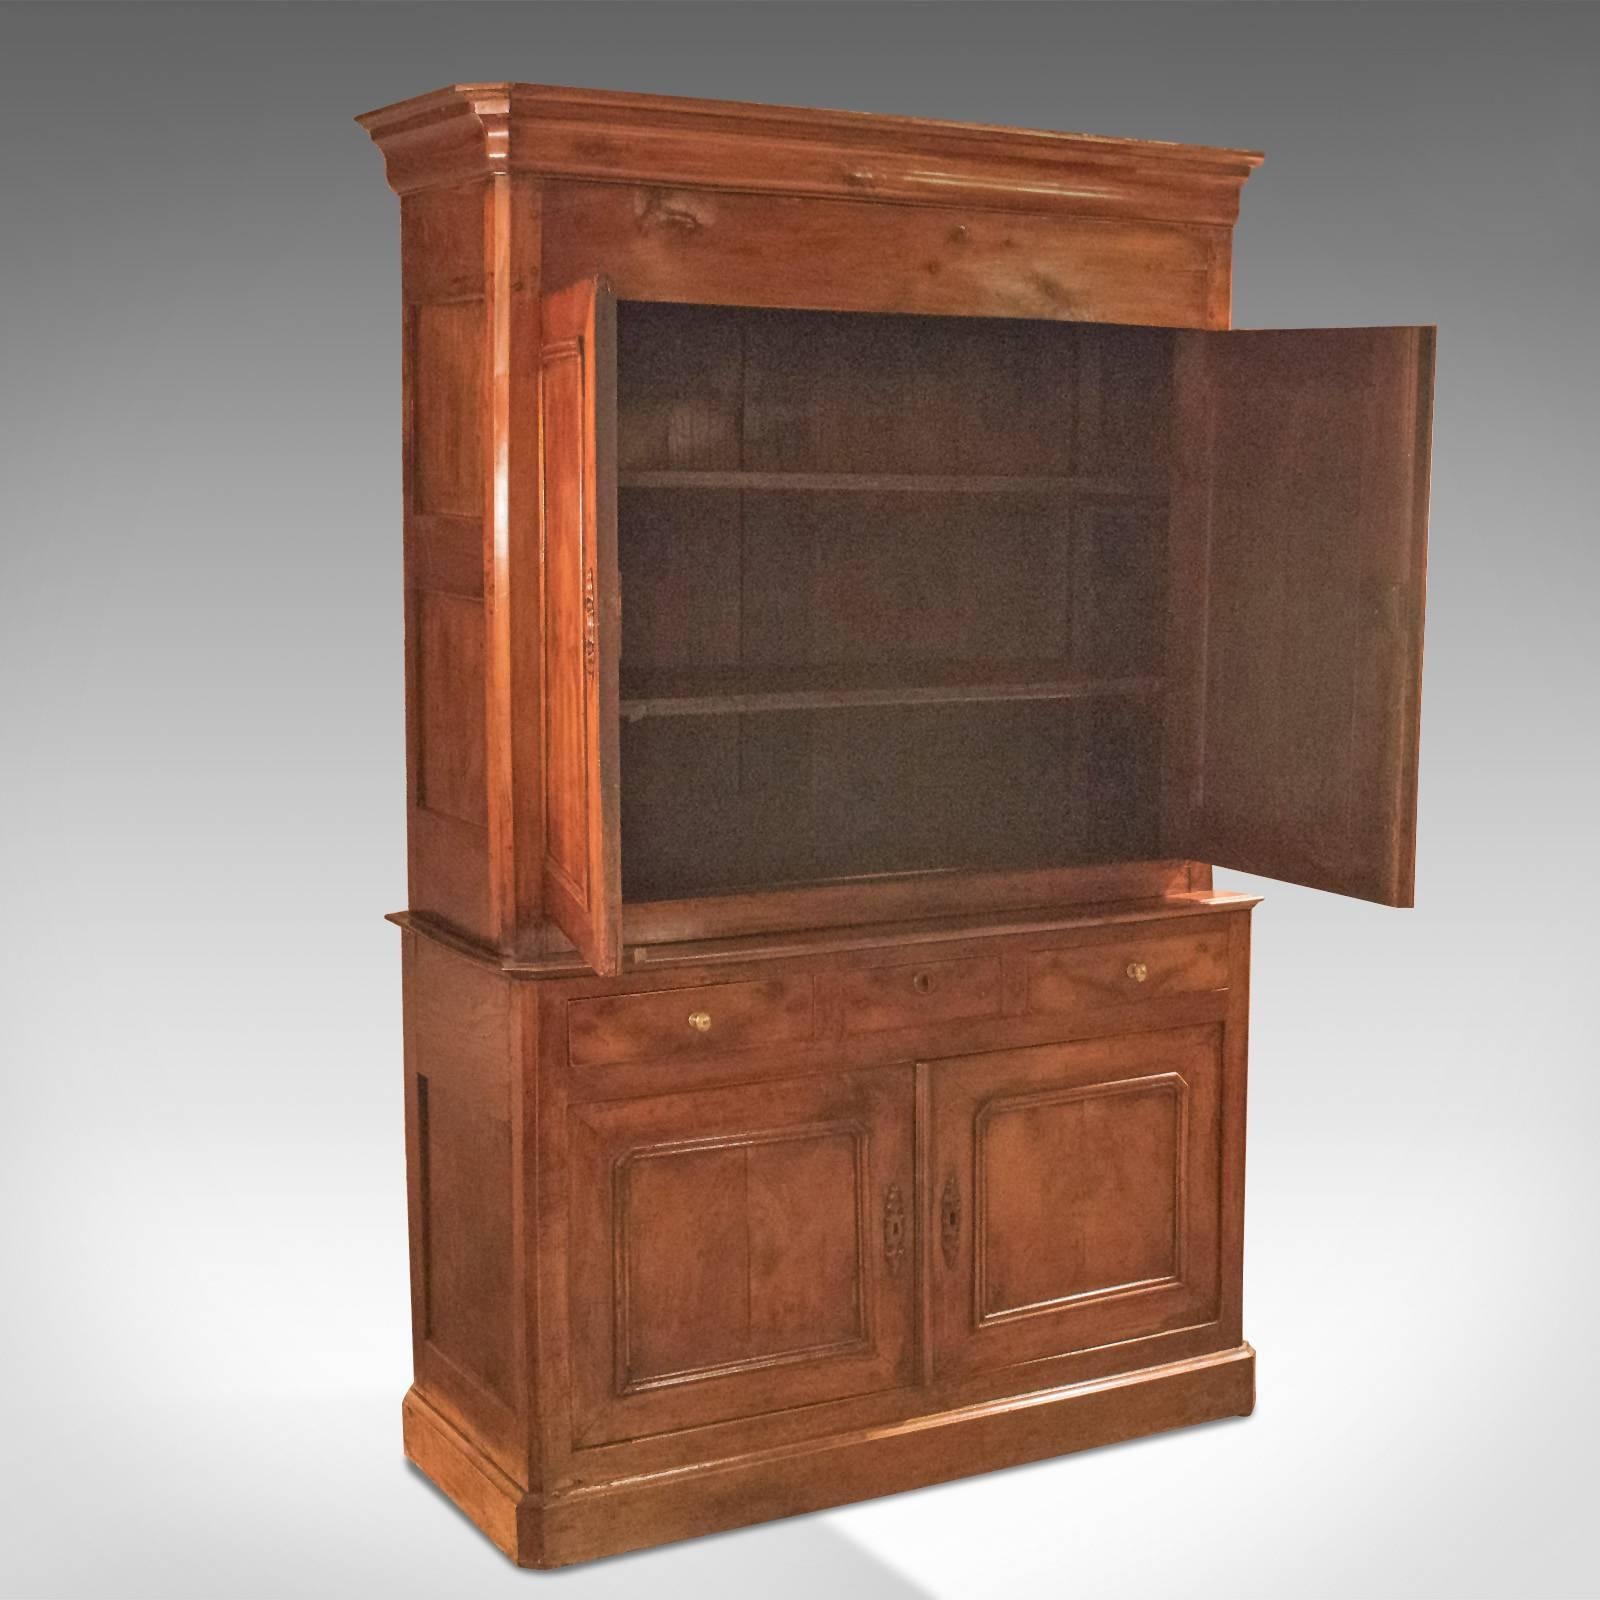 This is an antique buffet a deux corps, French dating to the late 18th century, circa 1780.

Crafted in stout fruitwood stock finished with yew wood
Desirable color with good grain interest and a beautifully aged patina
Country kitchen appeal in